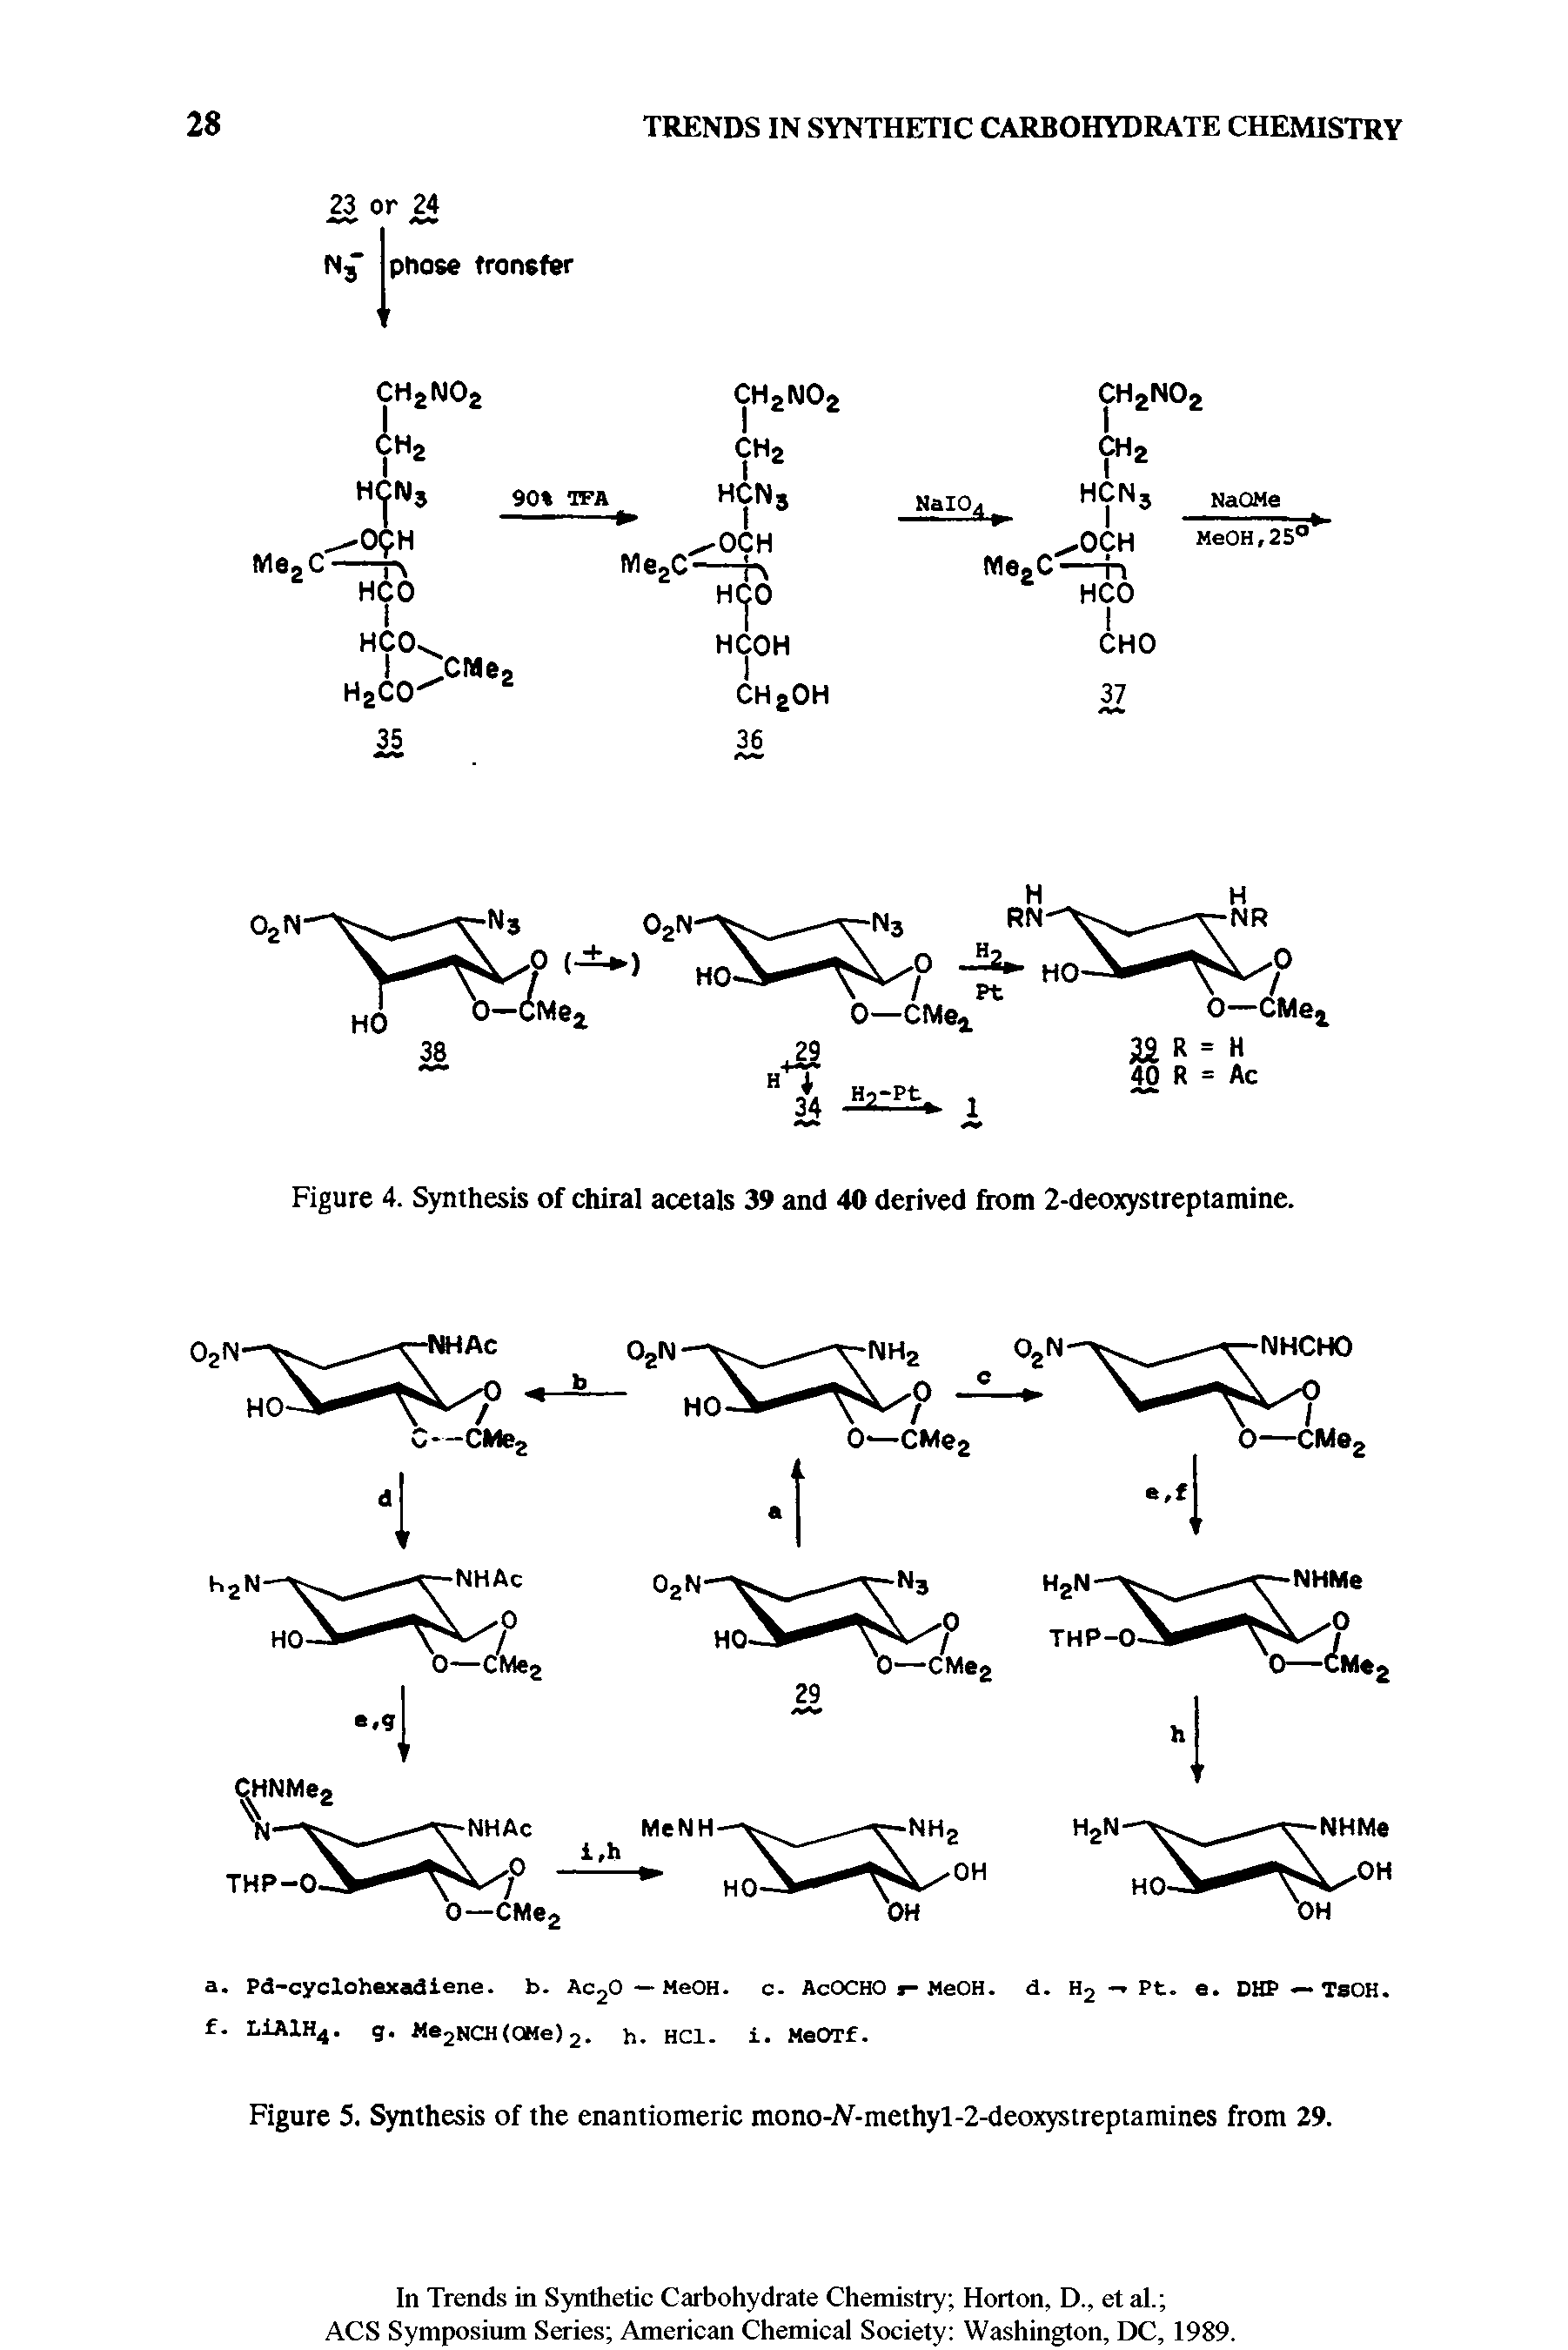 Figure 4. Synthesis of chiral acetals 39 and 40 derived from 2-deoxystreptamine.